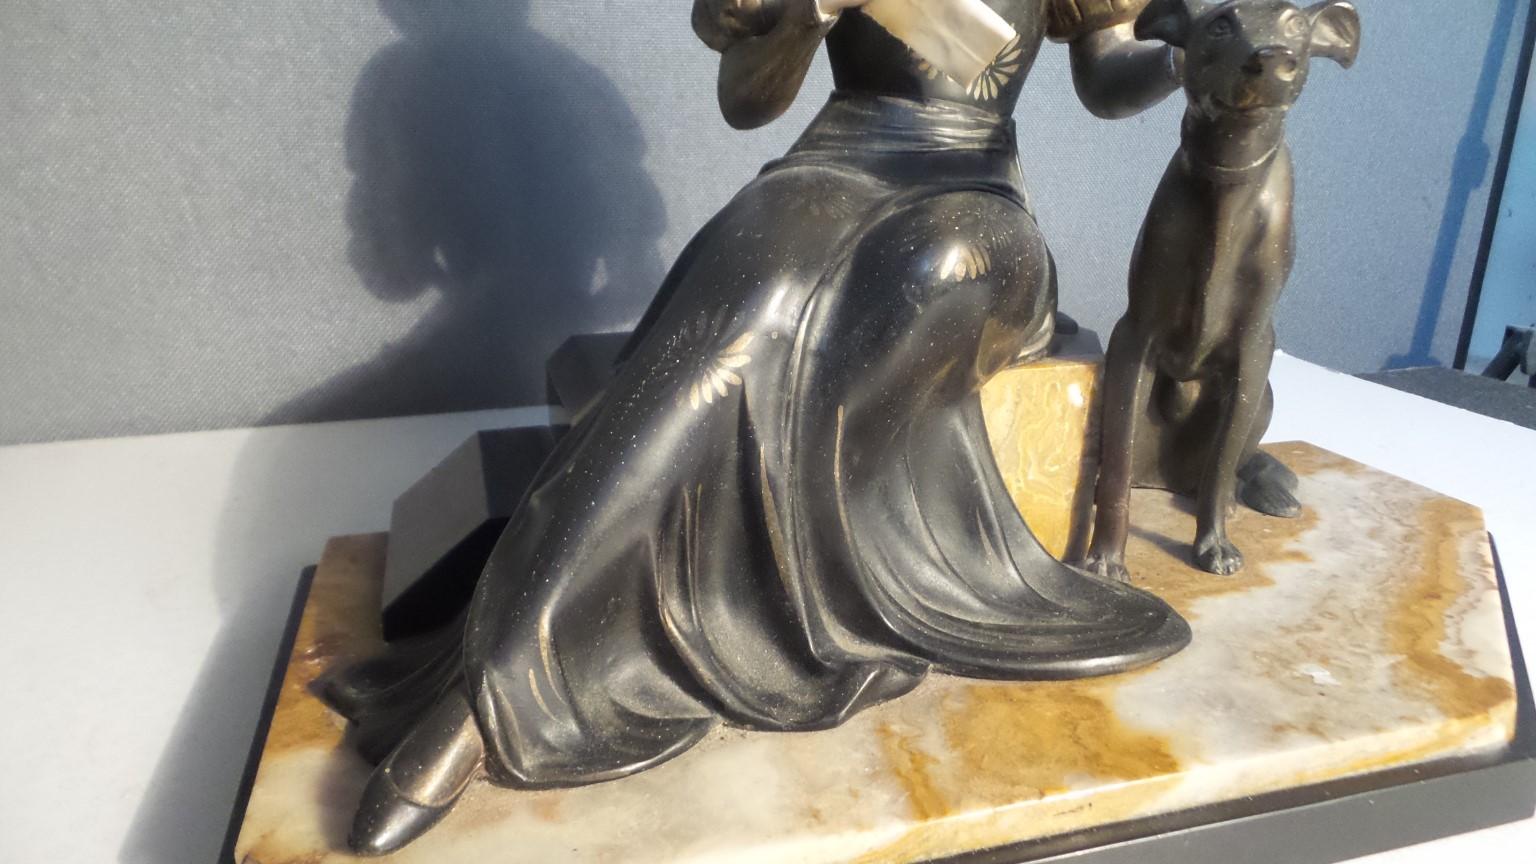 Large Art Deco Figurine Sculpture by Cipriani Signed  circa 1930 In Good Condition For Sale In Blackpool, Lancashire